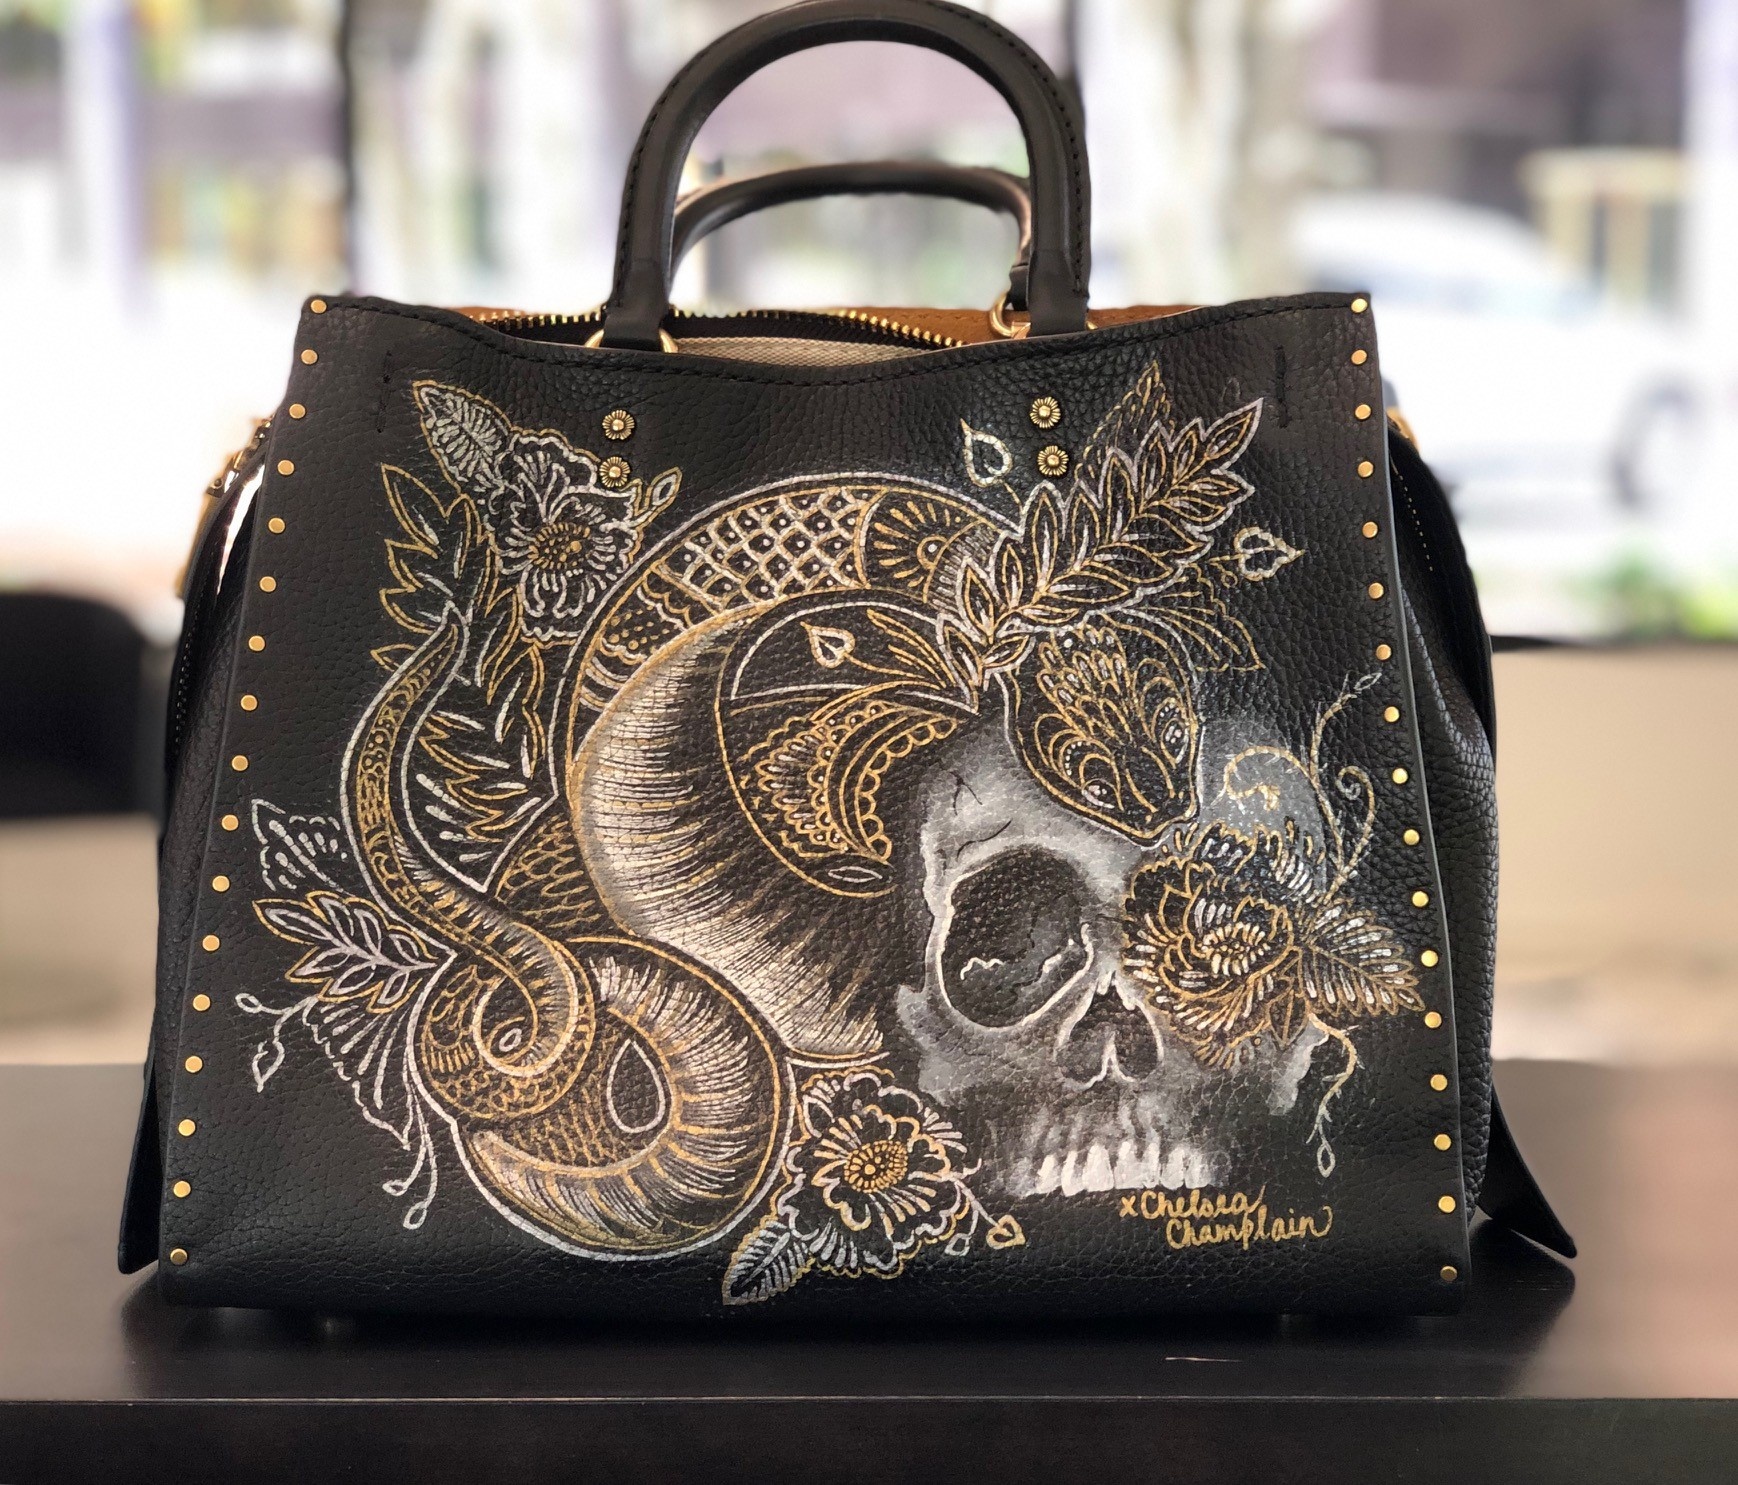 How to Care for Your Custom Painted Handbag - CgtDesigns